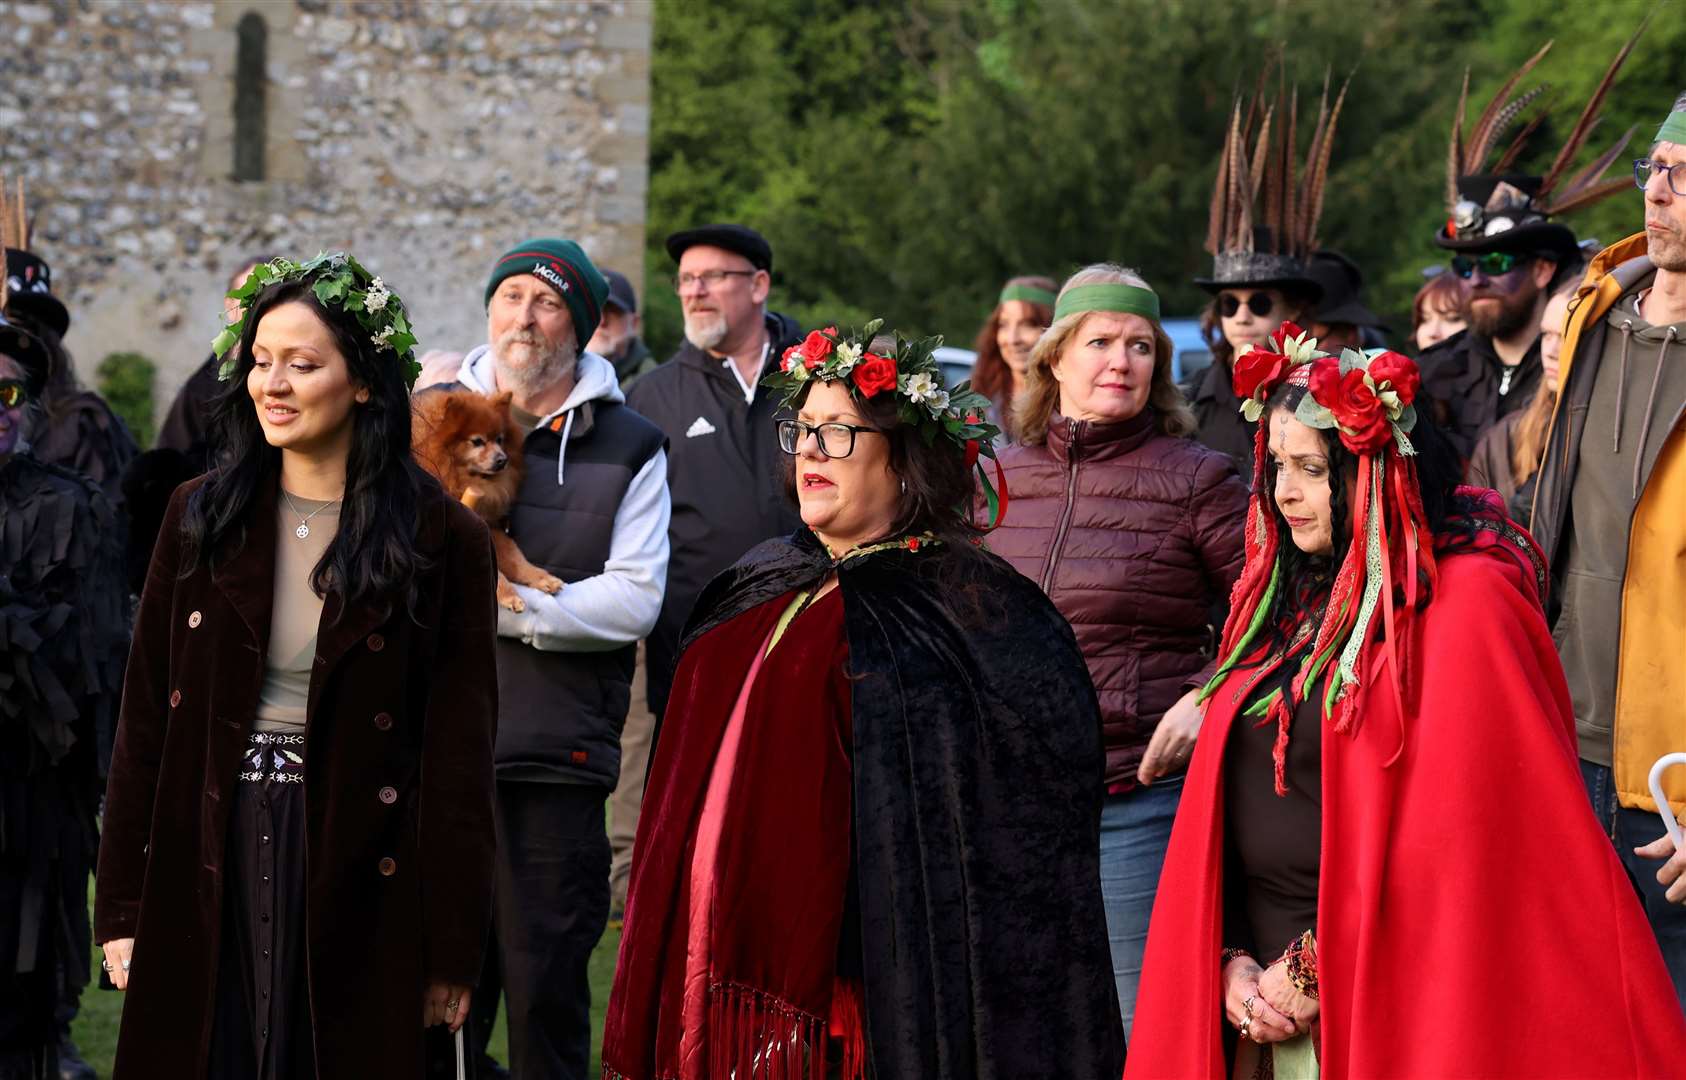 Crowds enjoying the celebrations of Beltane at Dode near Luddesdown, Gravesend